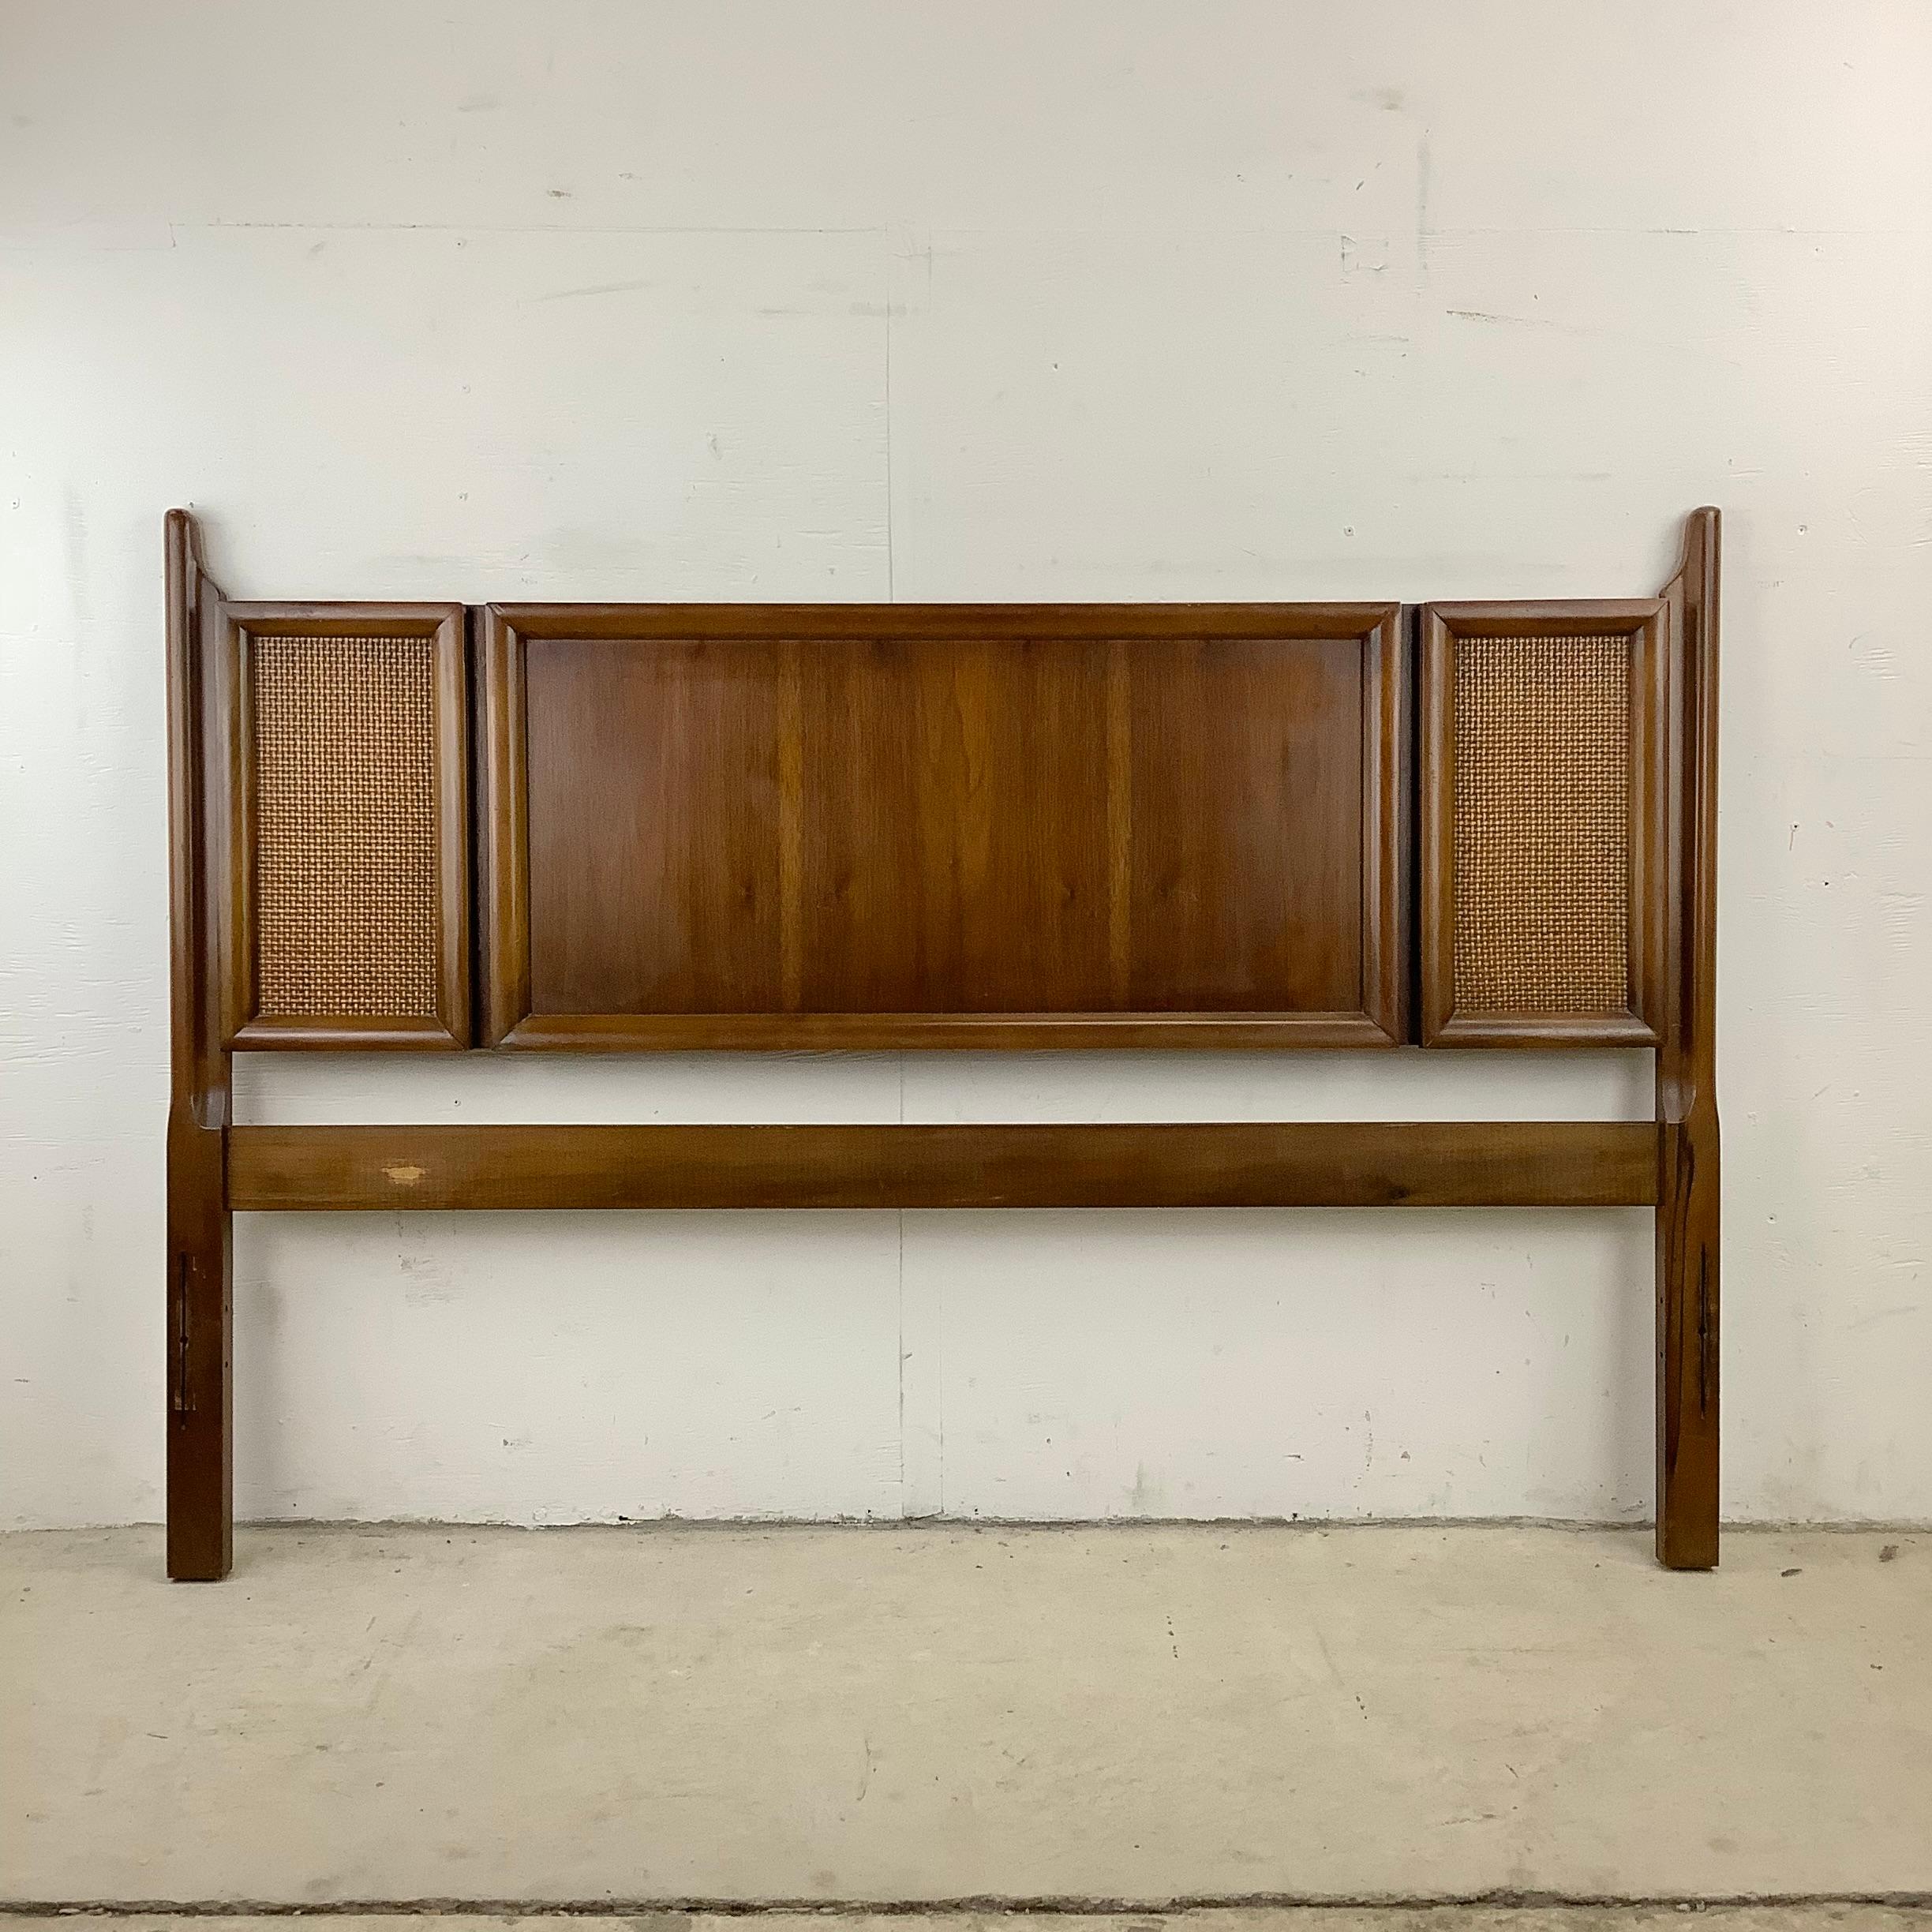 This mid-century full size headboard features vintage walnut finish with cane front details for added distinction to your bedroom centerpiece. At 56 inches wide the headboard is a great fit for most full size bed frames. 

Dimensions: 56 W 2 D 38